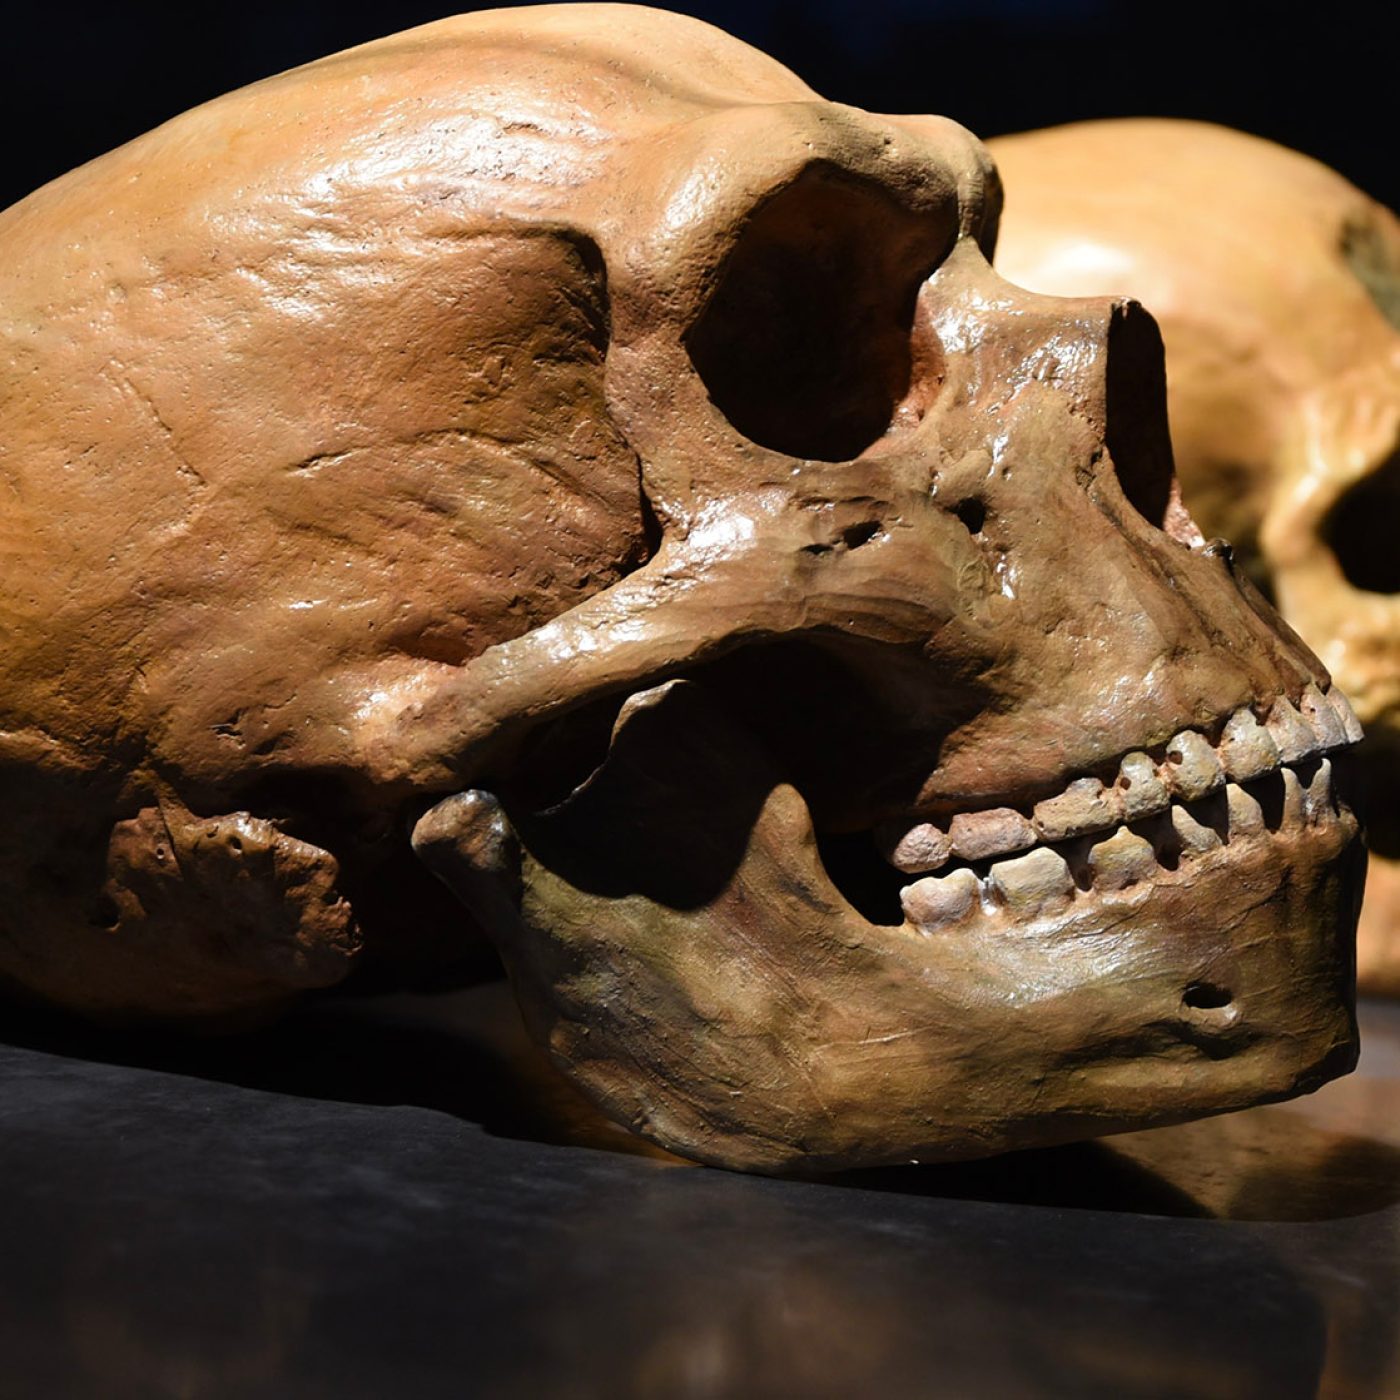 Scientists found fossils from a new species of human that's 130,000 years old